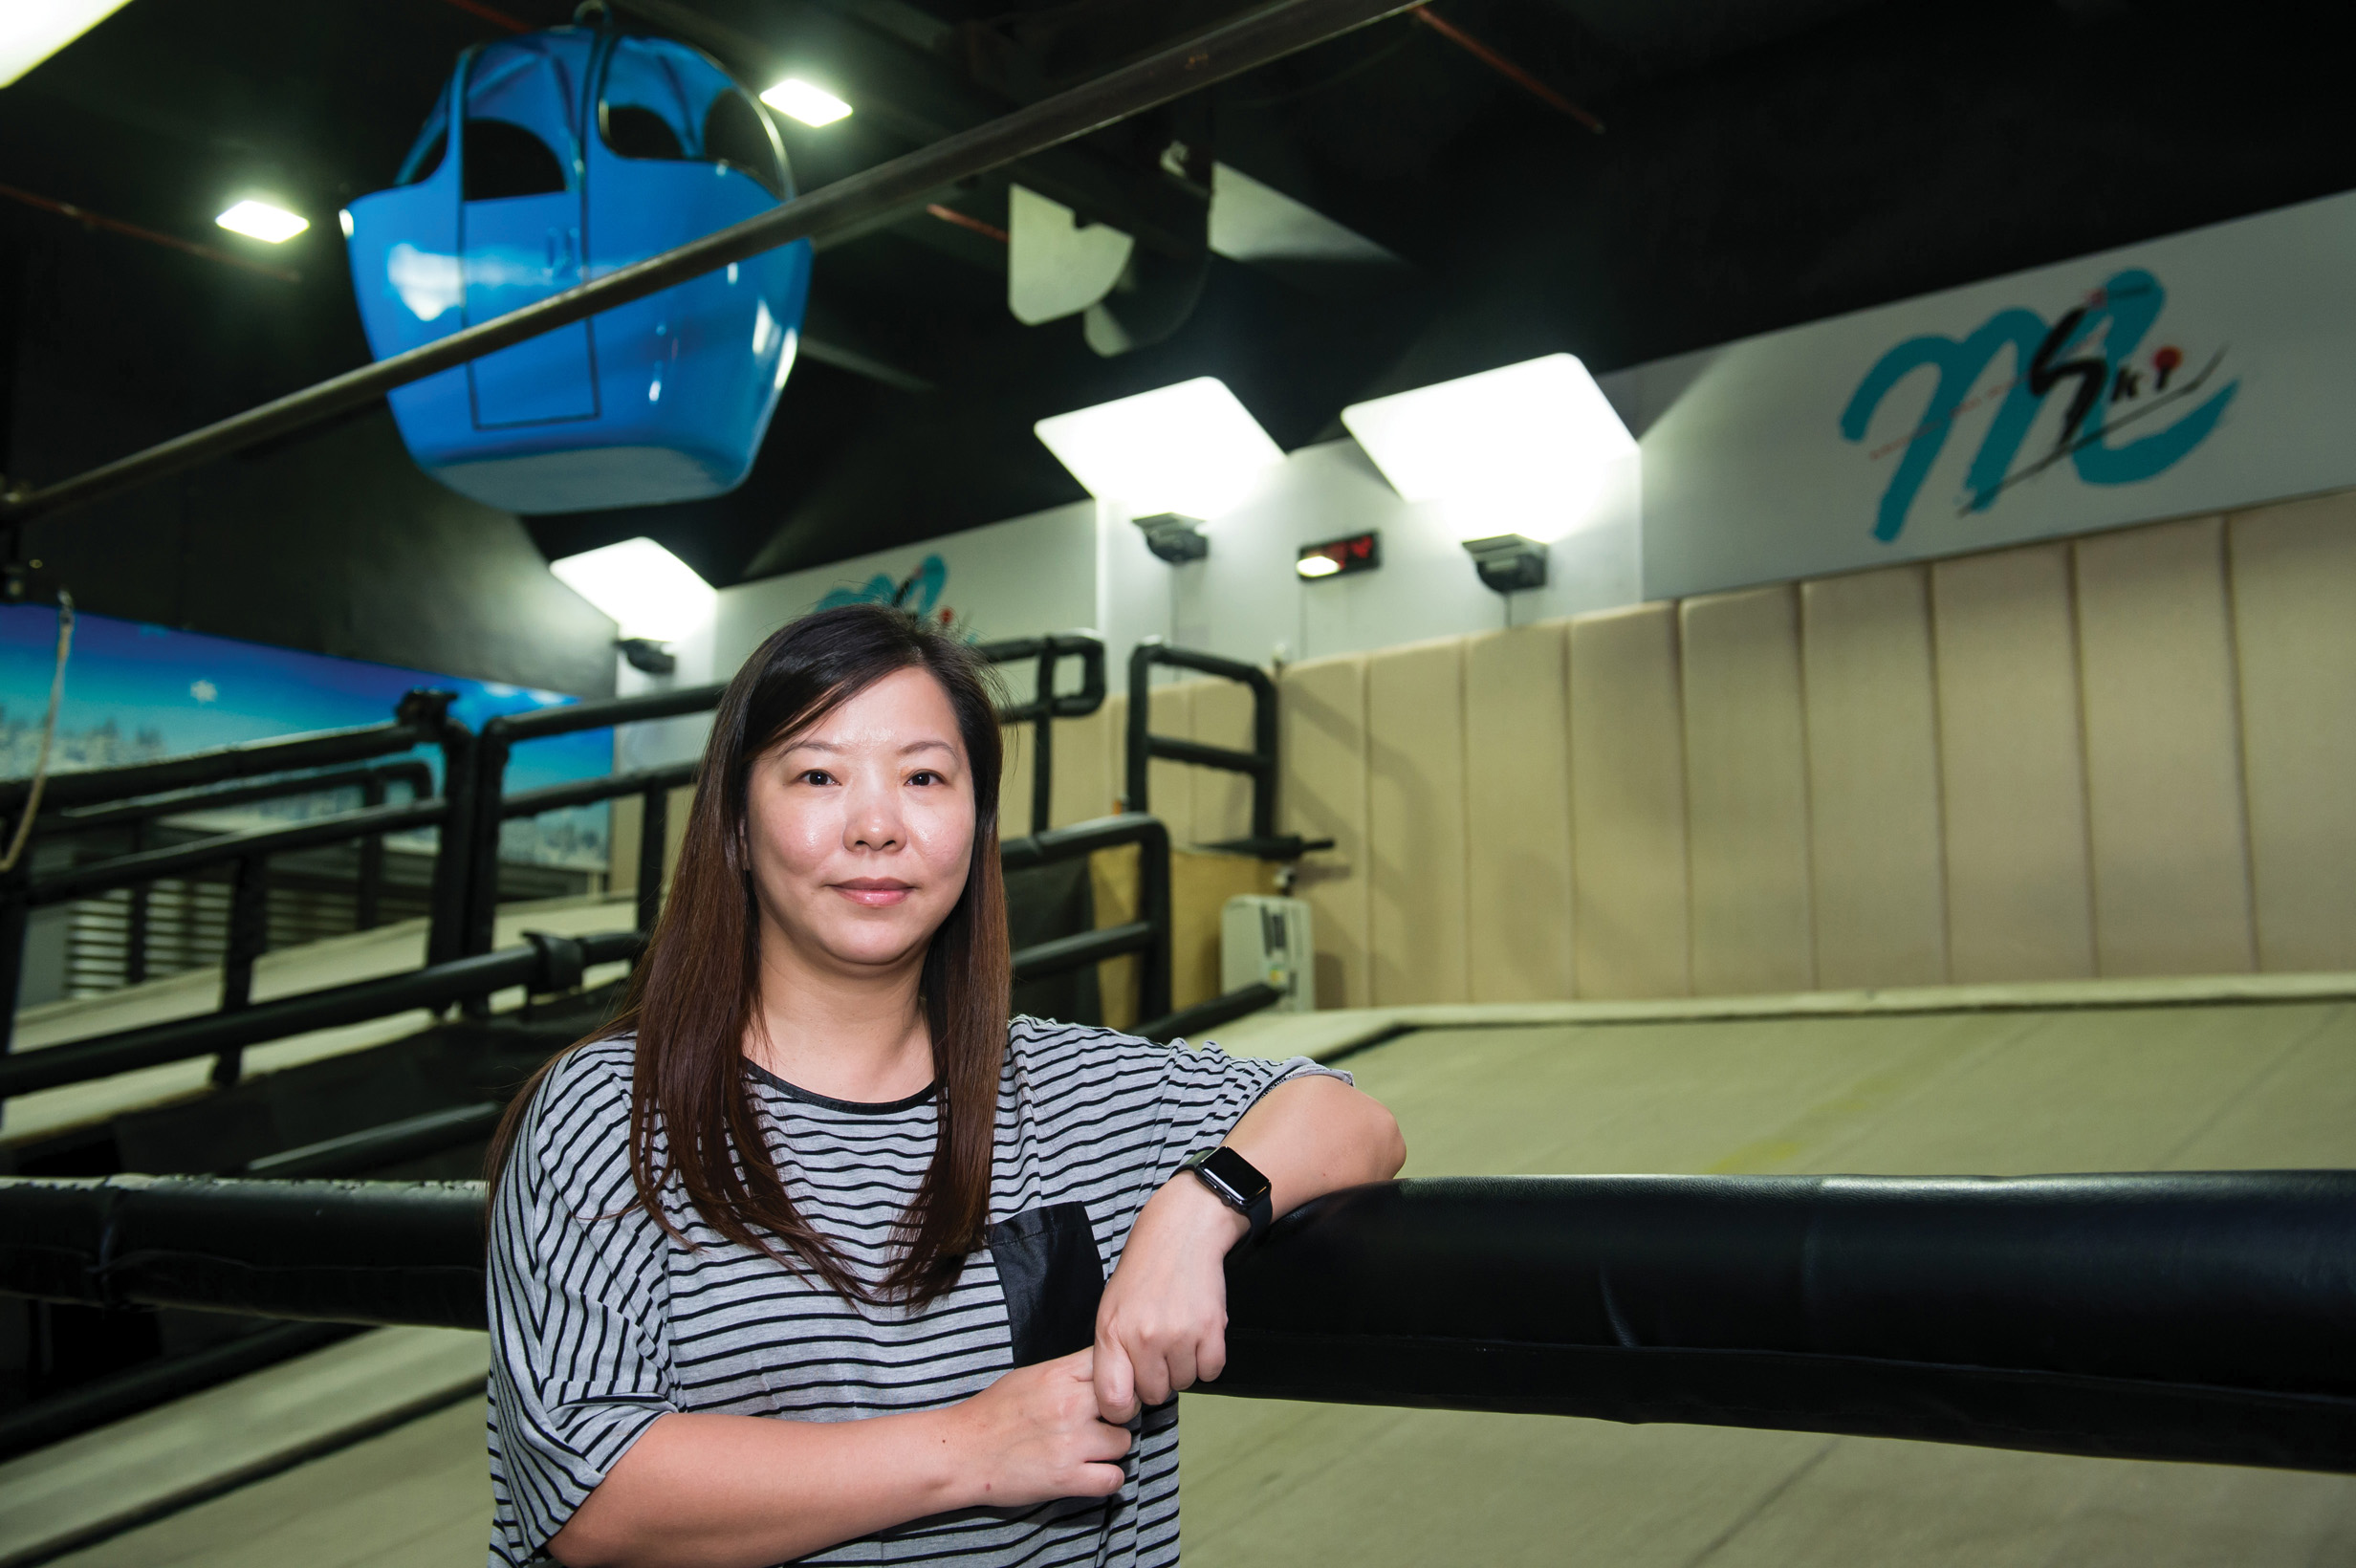 The Macao Ski and Snowboard Association opened the learning centre in 2014, says Joanne Tong